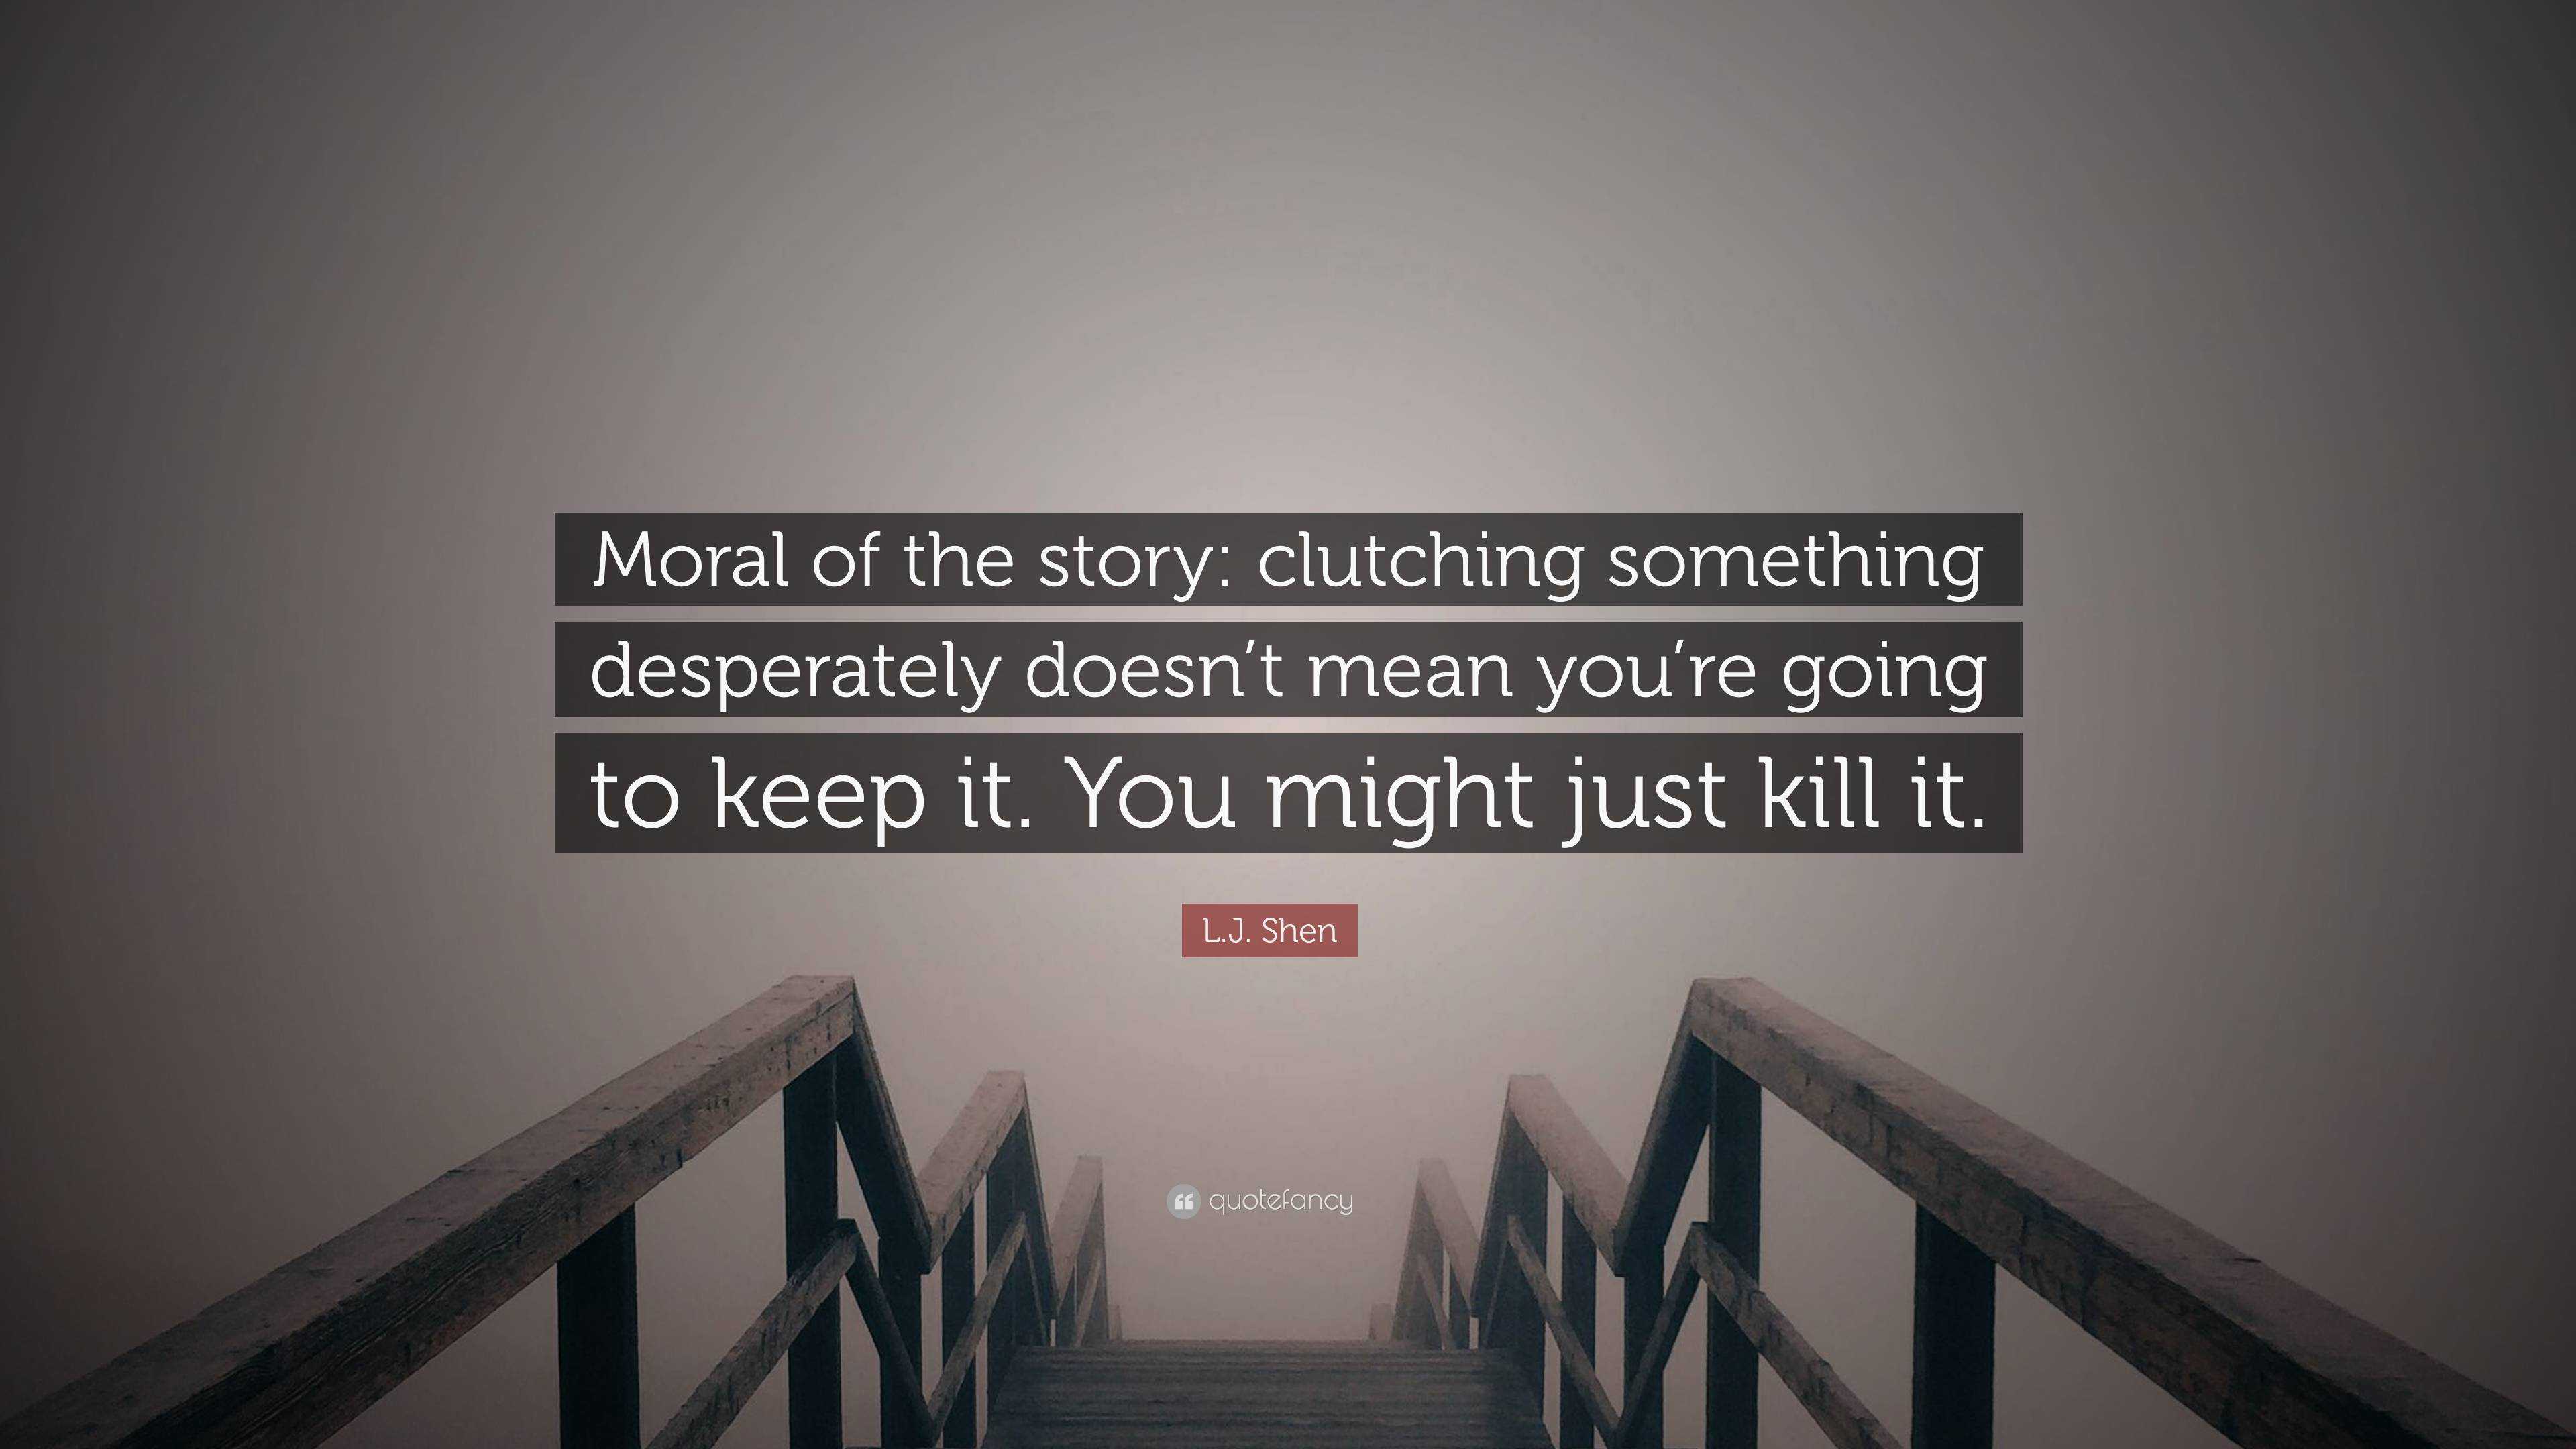 L.J. Shen Quote: “Moral of the story: clutching something